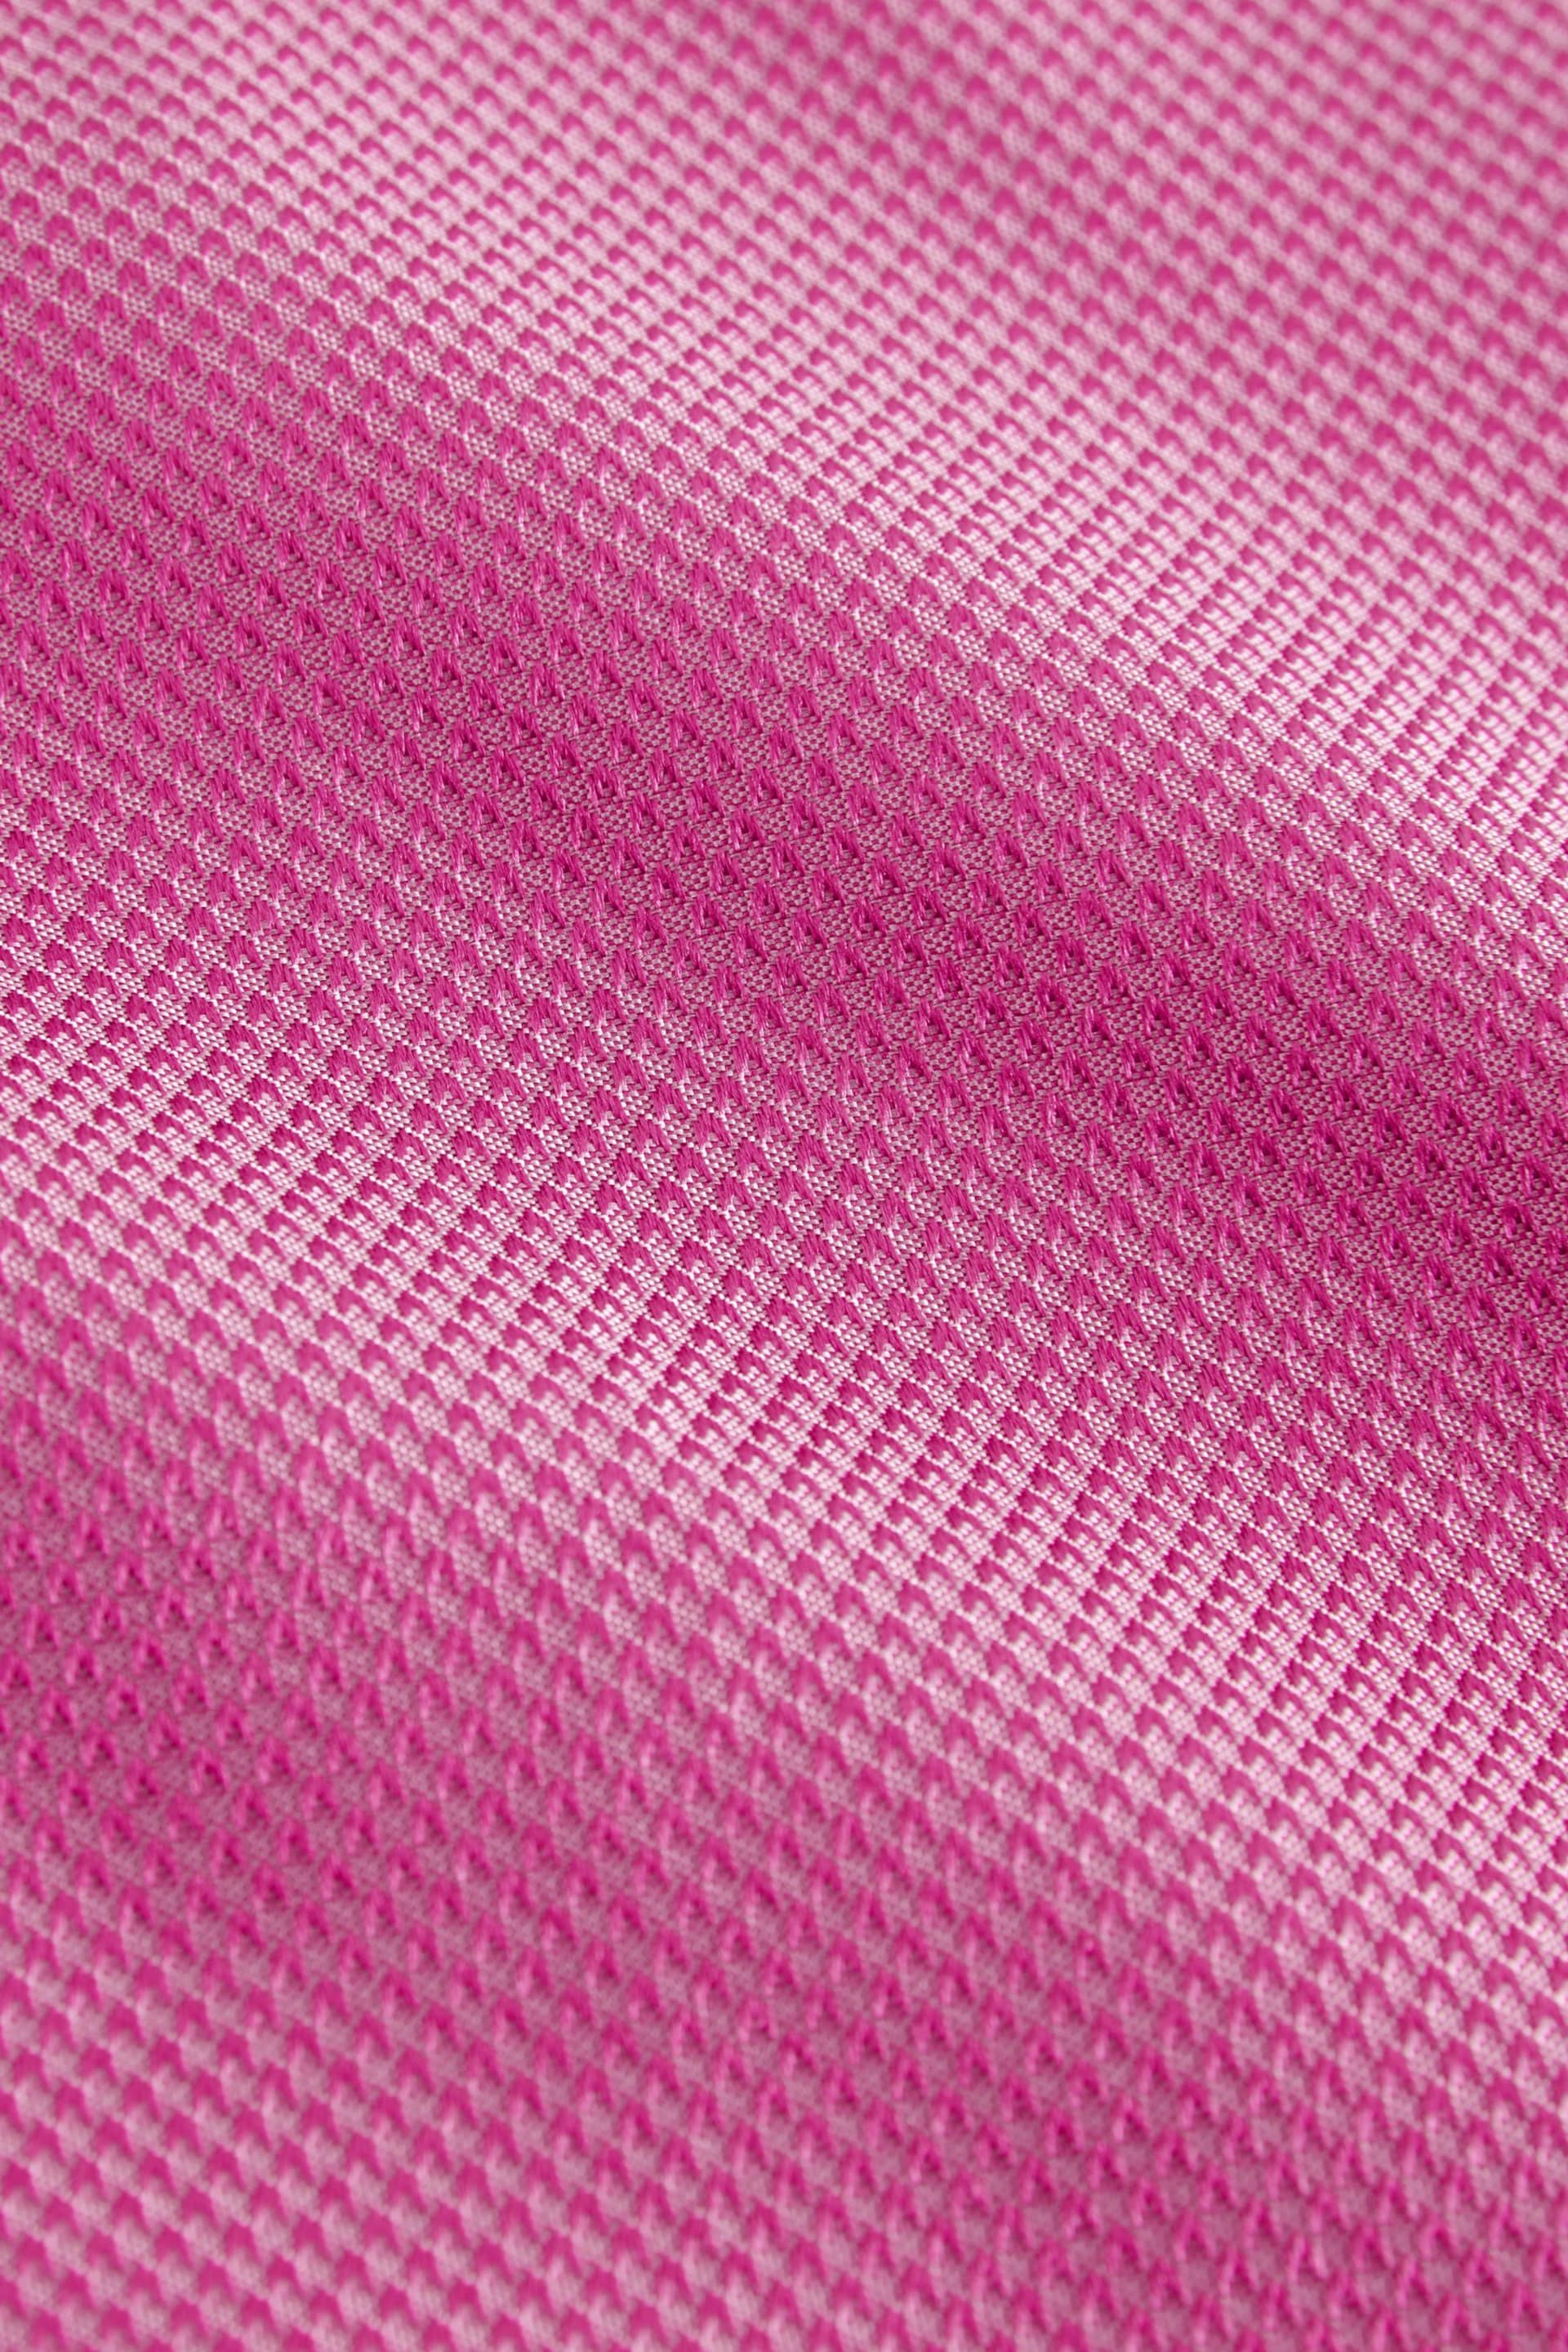 Fuchsia Pink Textured Silk Lapel Pin And Pocket Square Set - Image 3 of 4